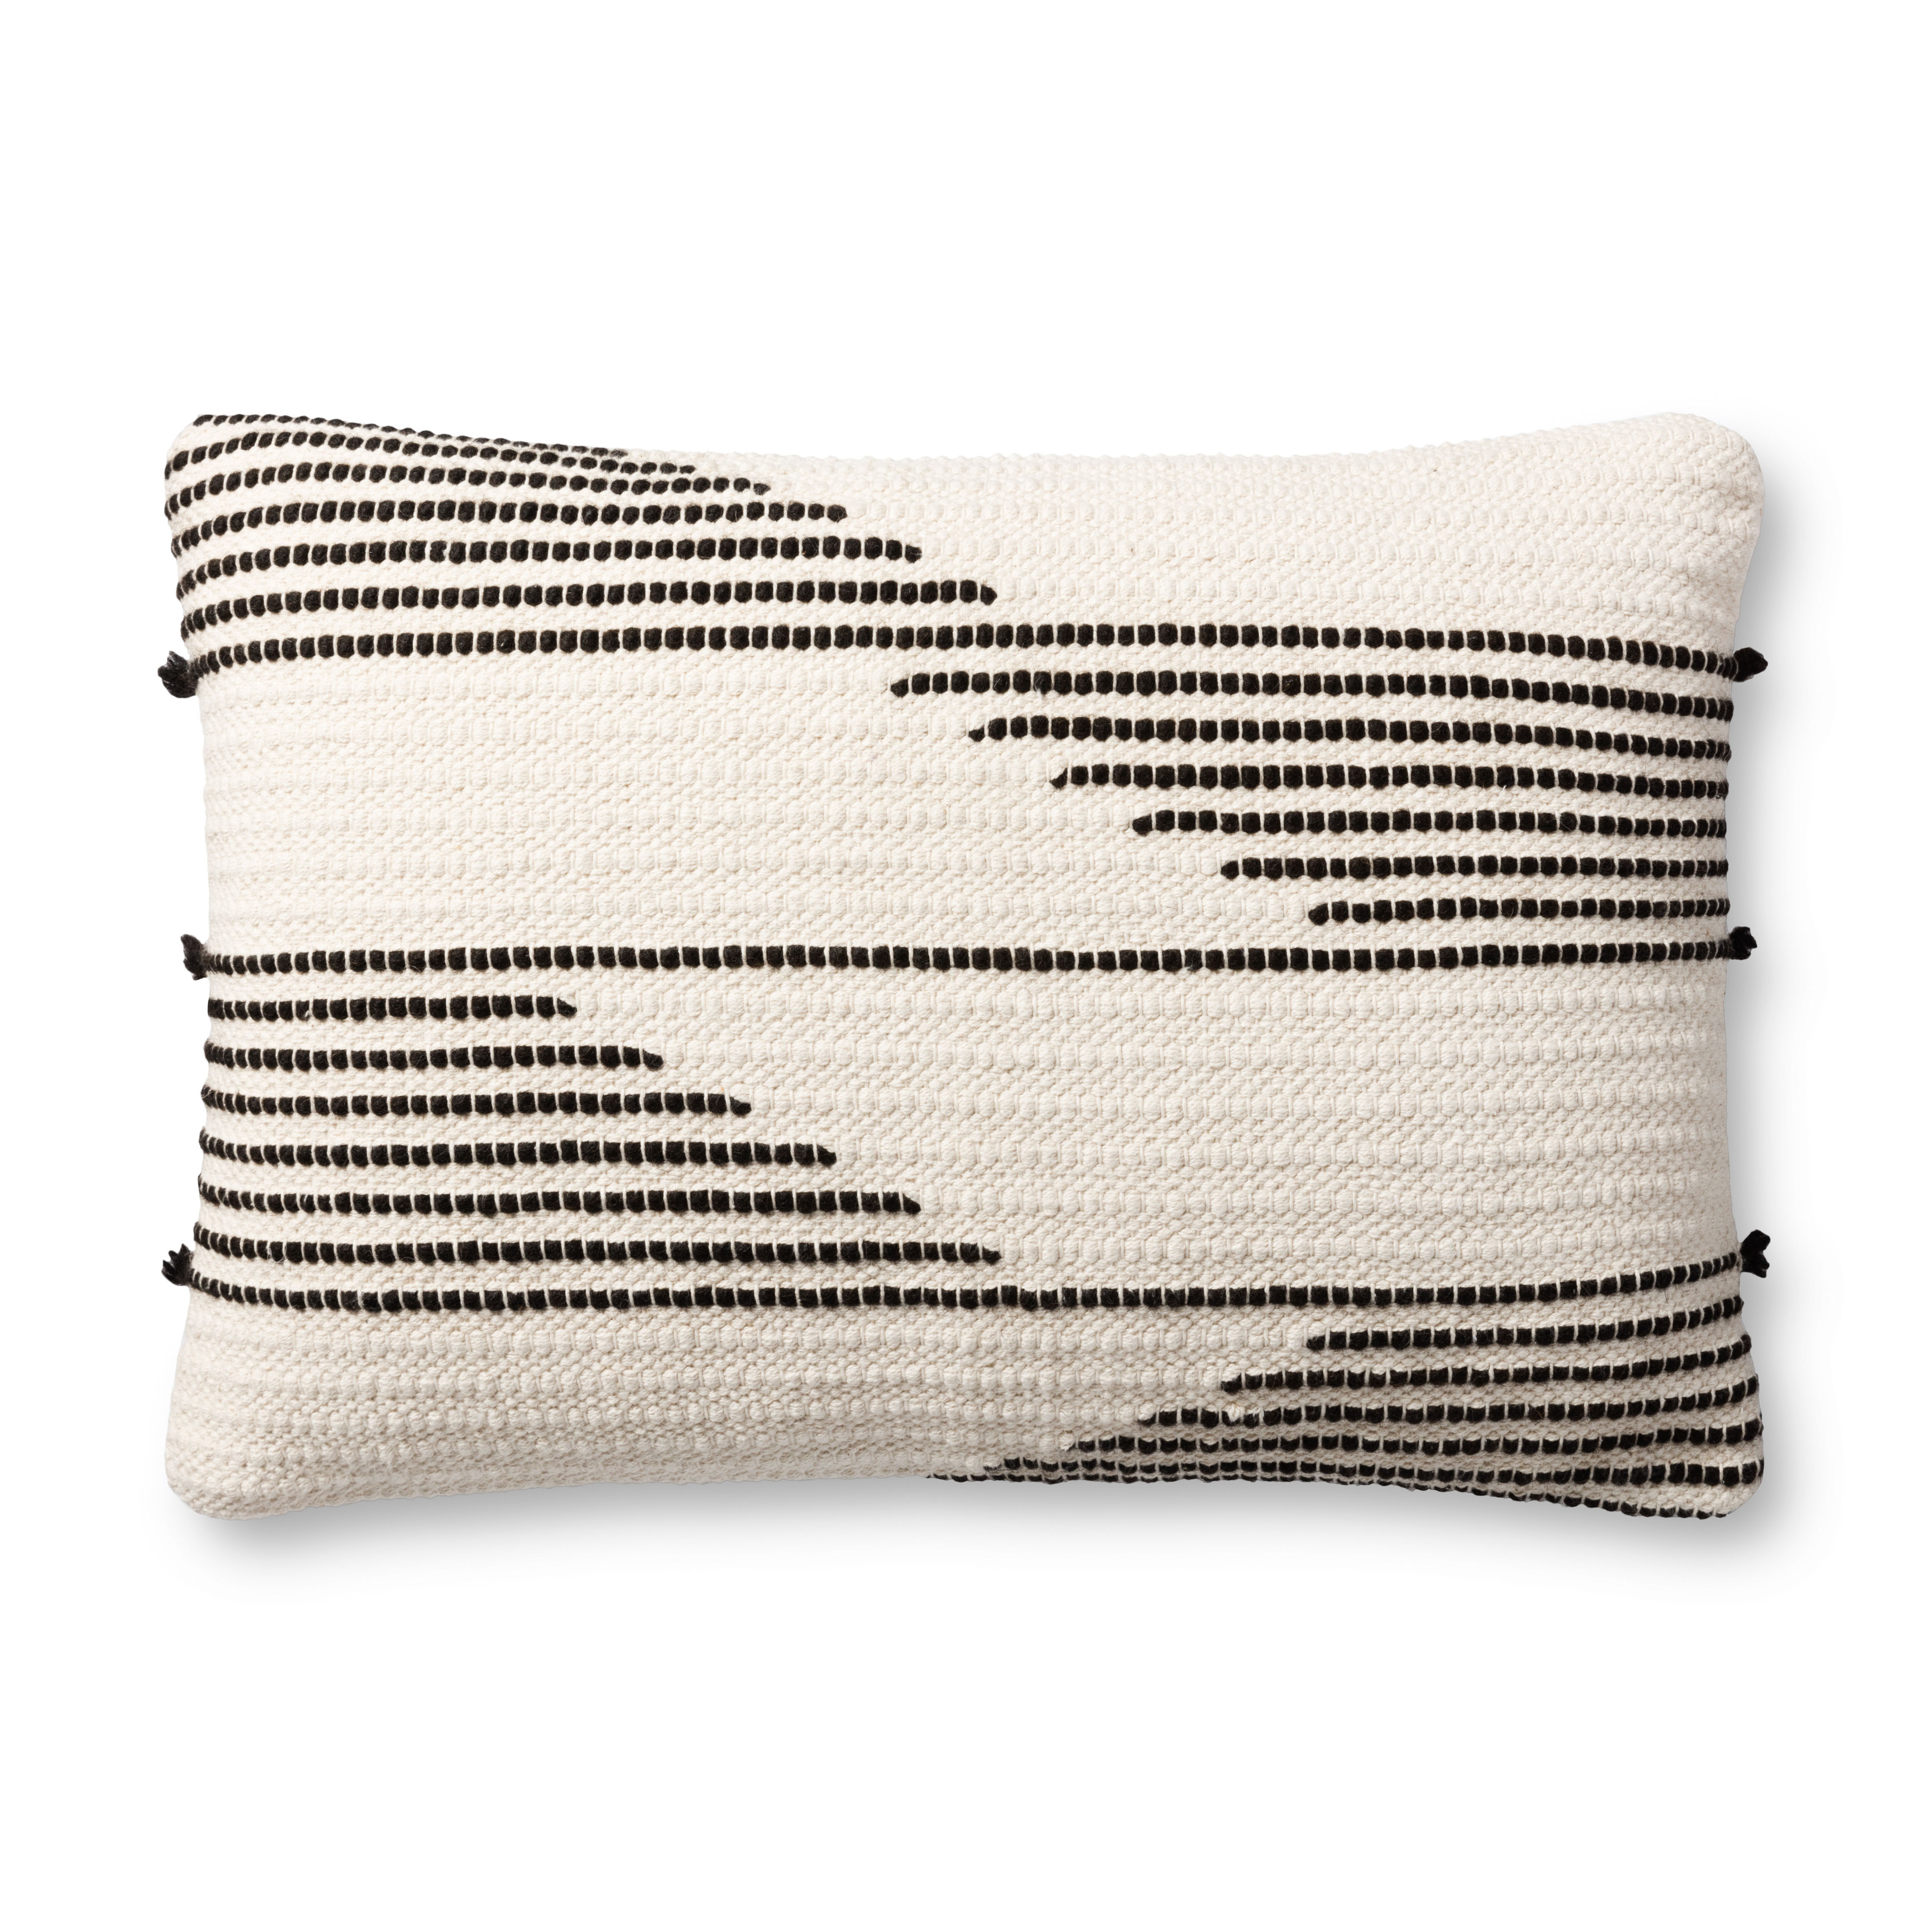 PILLOWS P1156 IVORY / BLACK 16" x 26" Cover w/Poly - Magnolia Home by Joana Gaines Crafted by Loloi Rugs